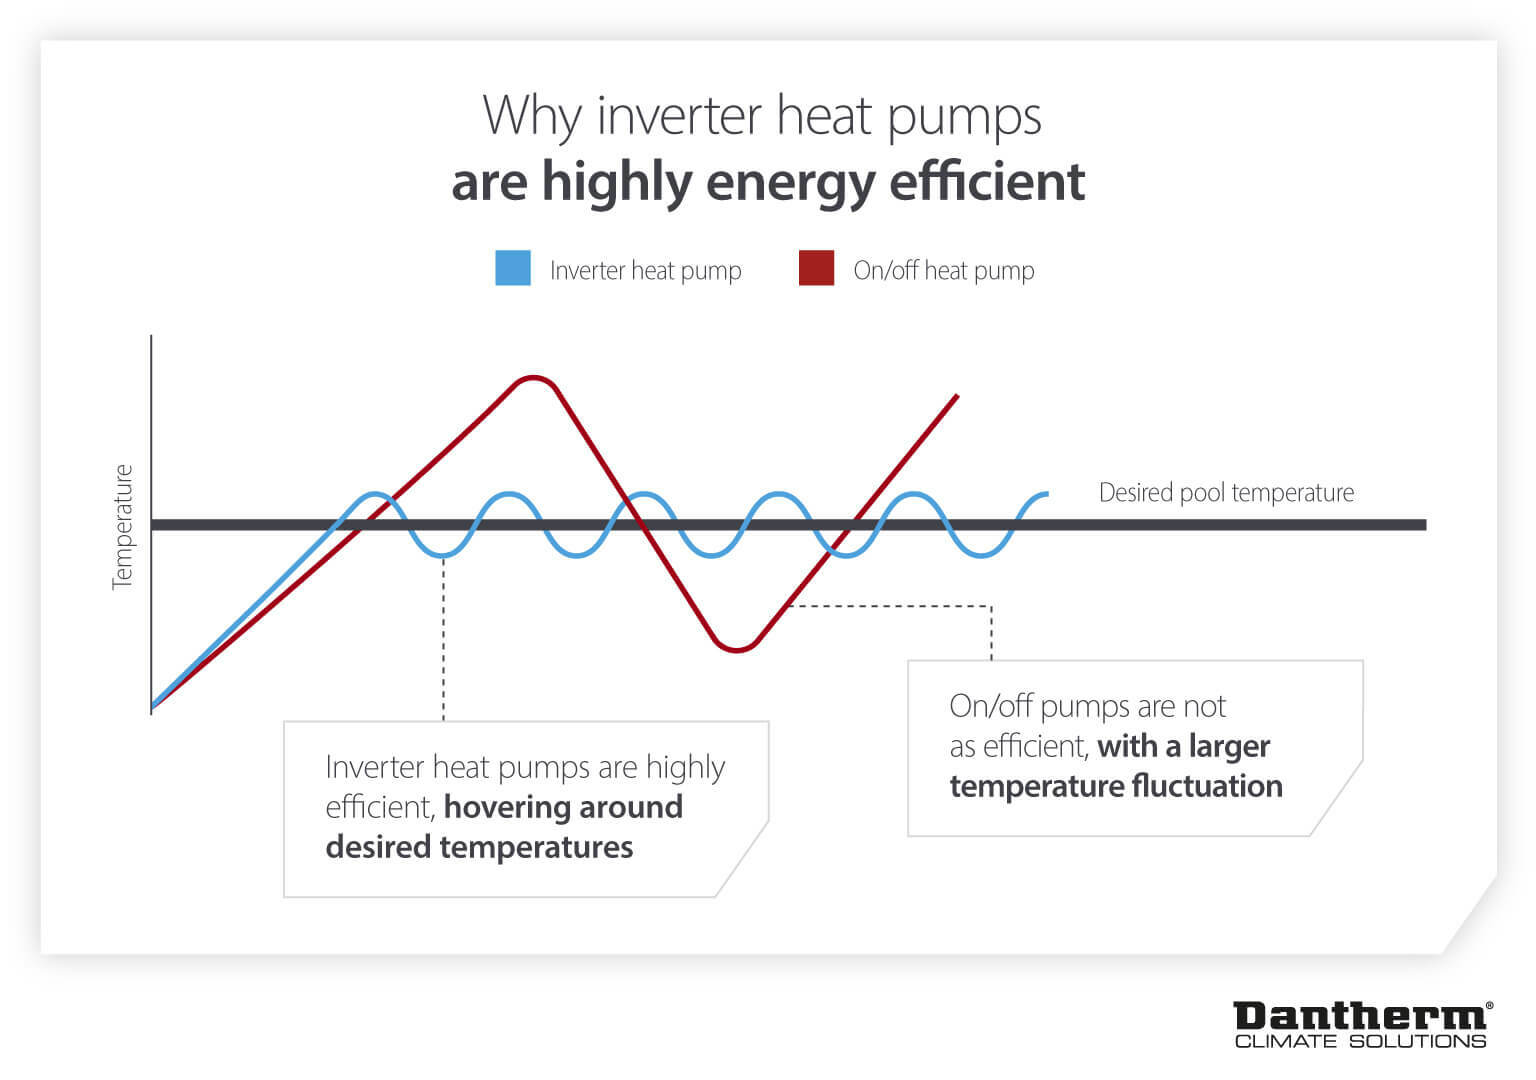 Infographic showing why inverter pool heat pumps are energy efficient compared to standard on/off swimming pool heat pumps.